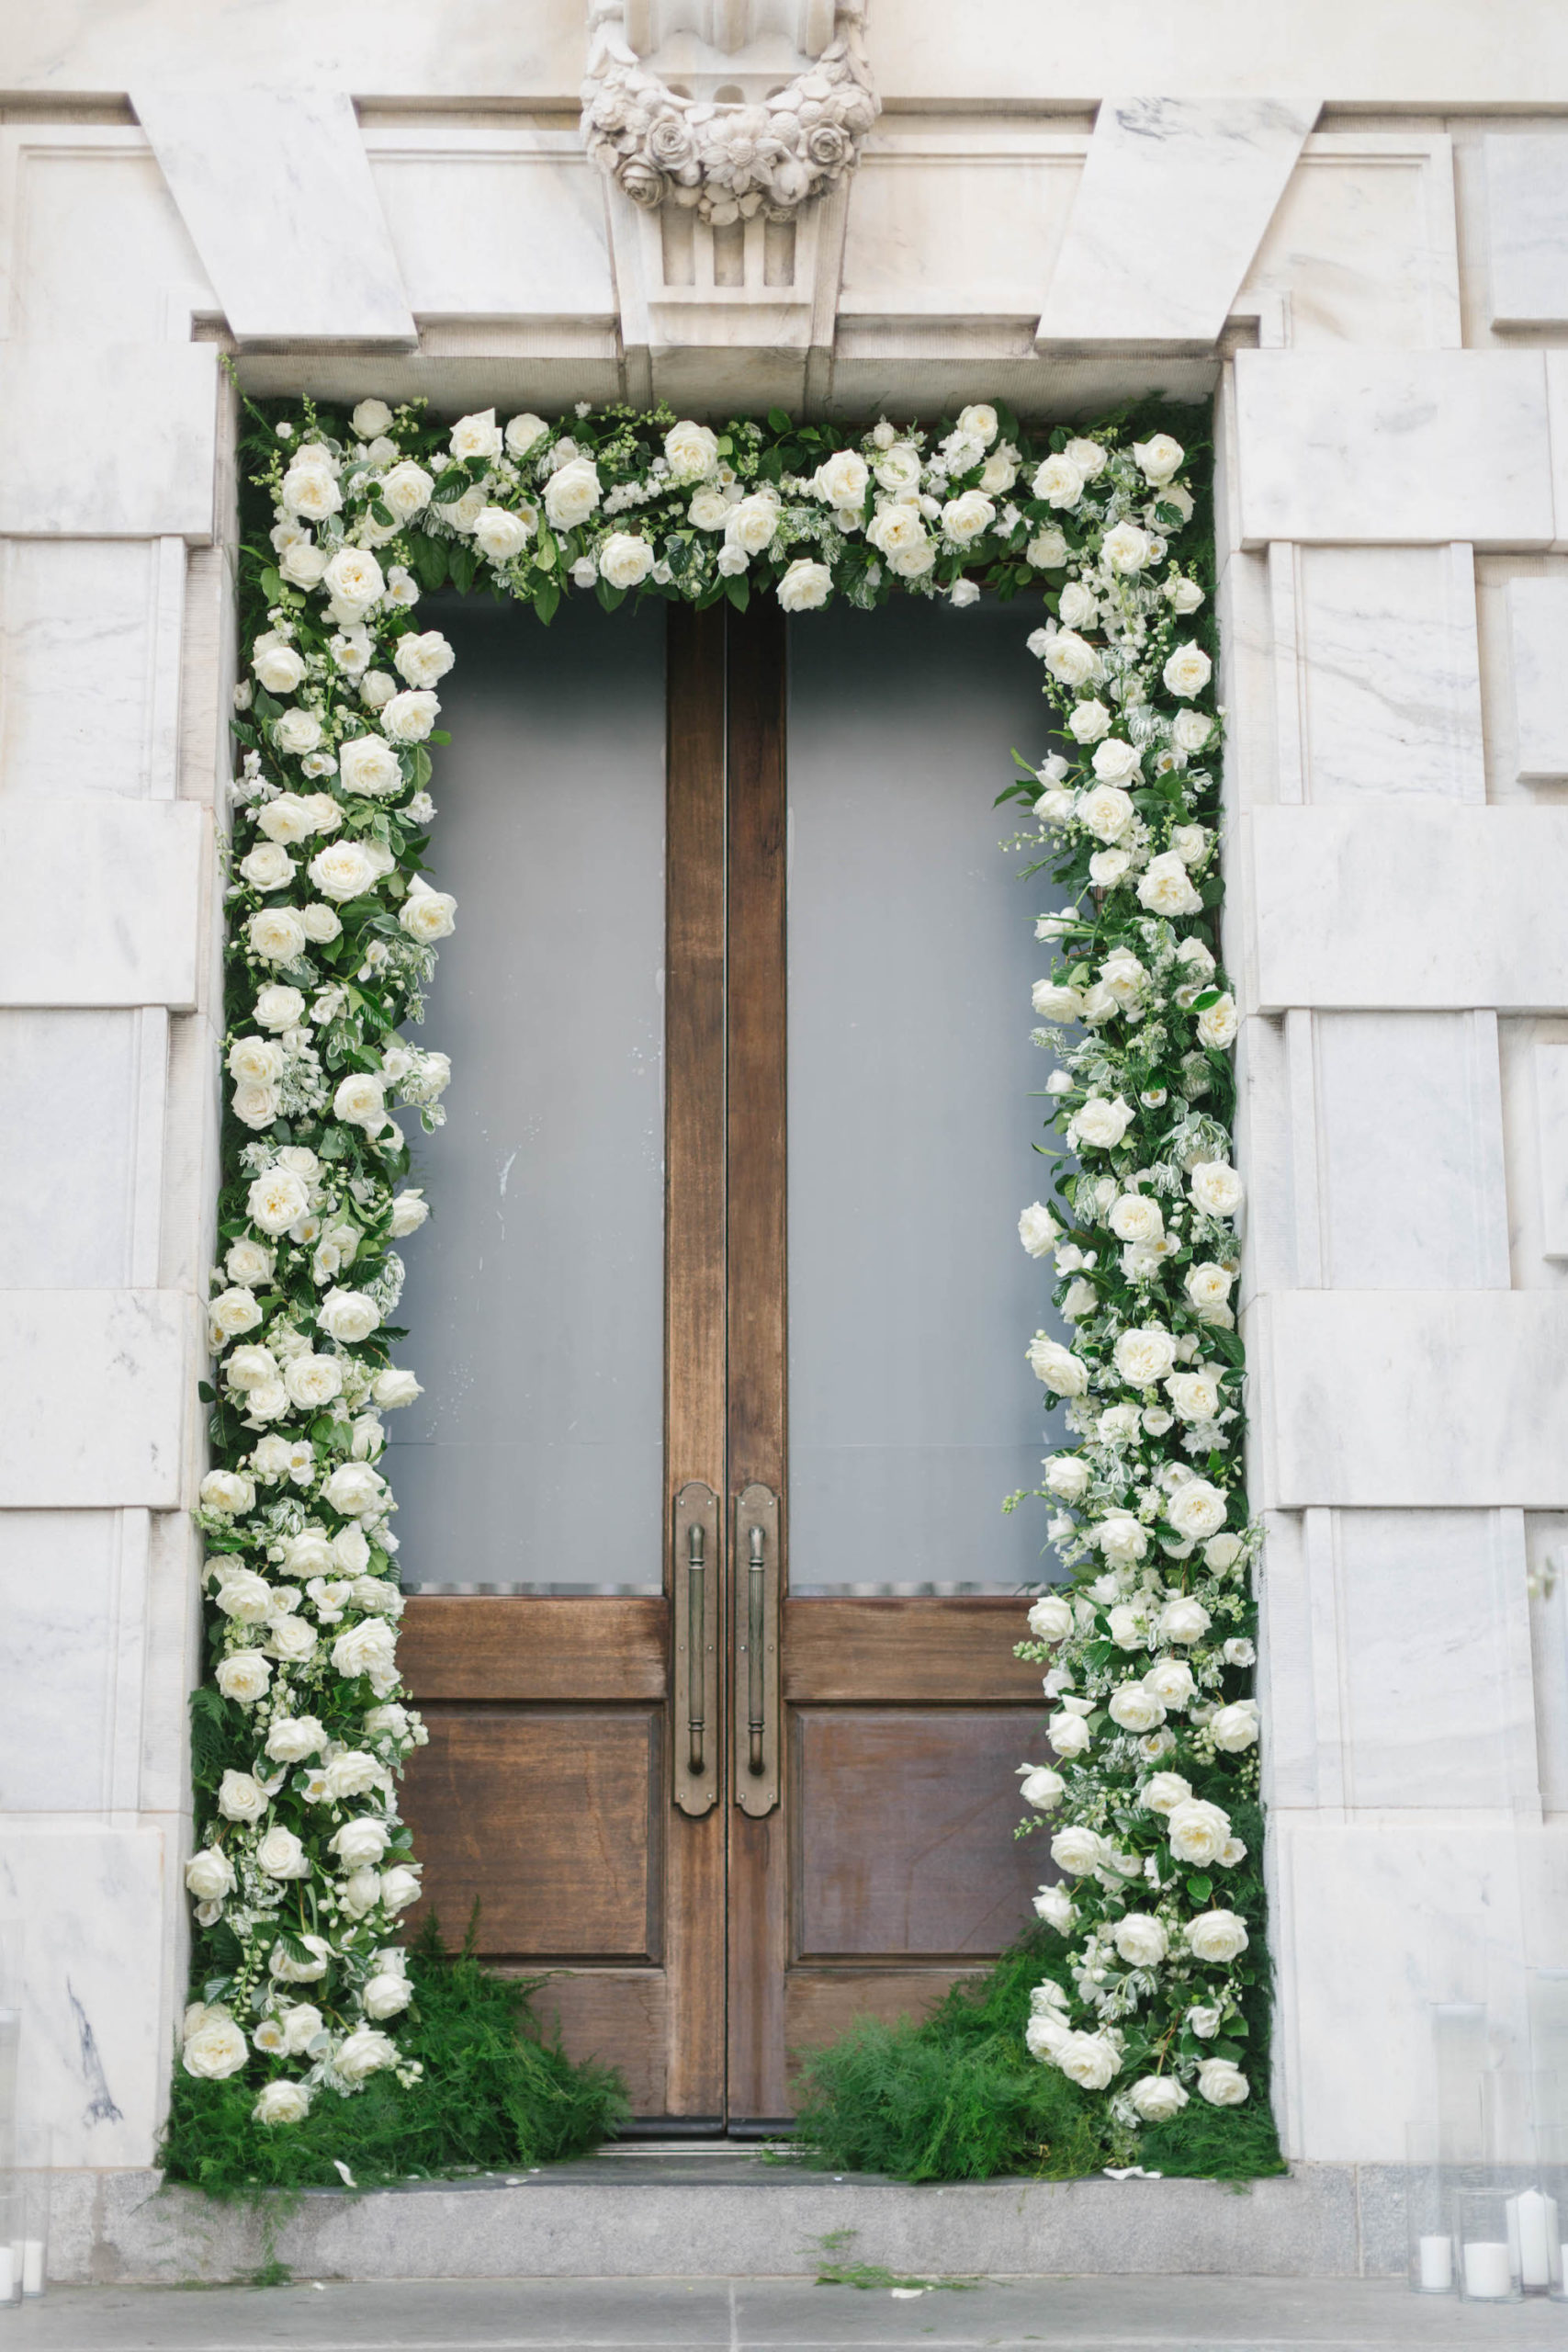 Romantic Garden Inspired Wedding Ceremony Decor, Greenery and White Roses Doorway Arch | Tampa Wedding Planner Parties A'la Carte